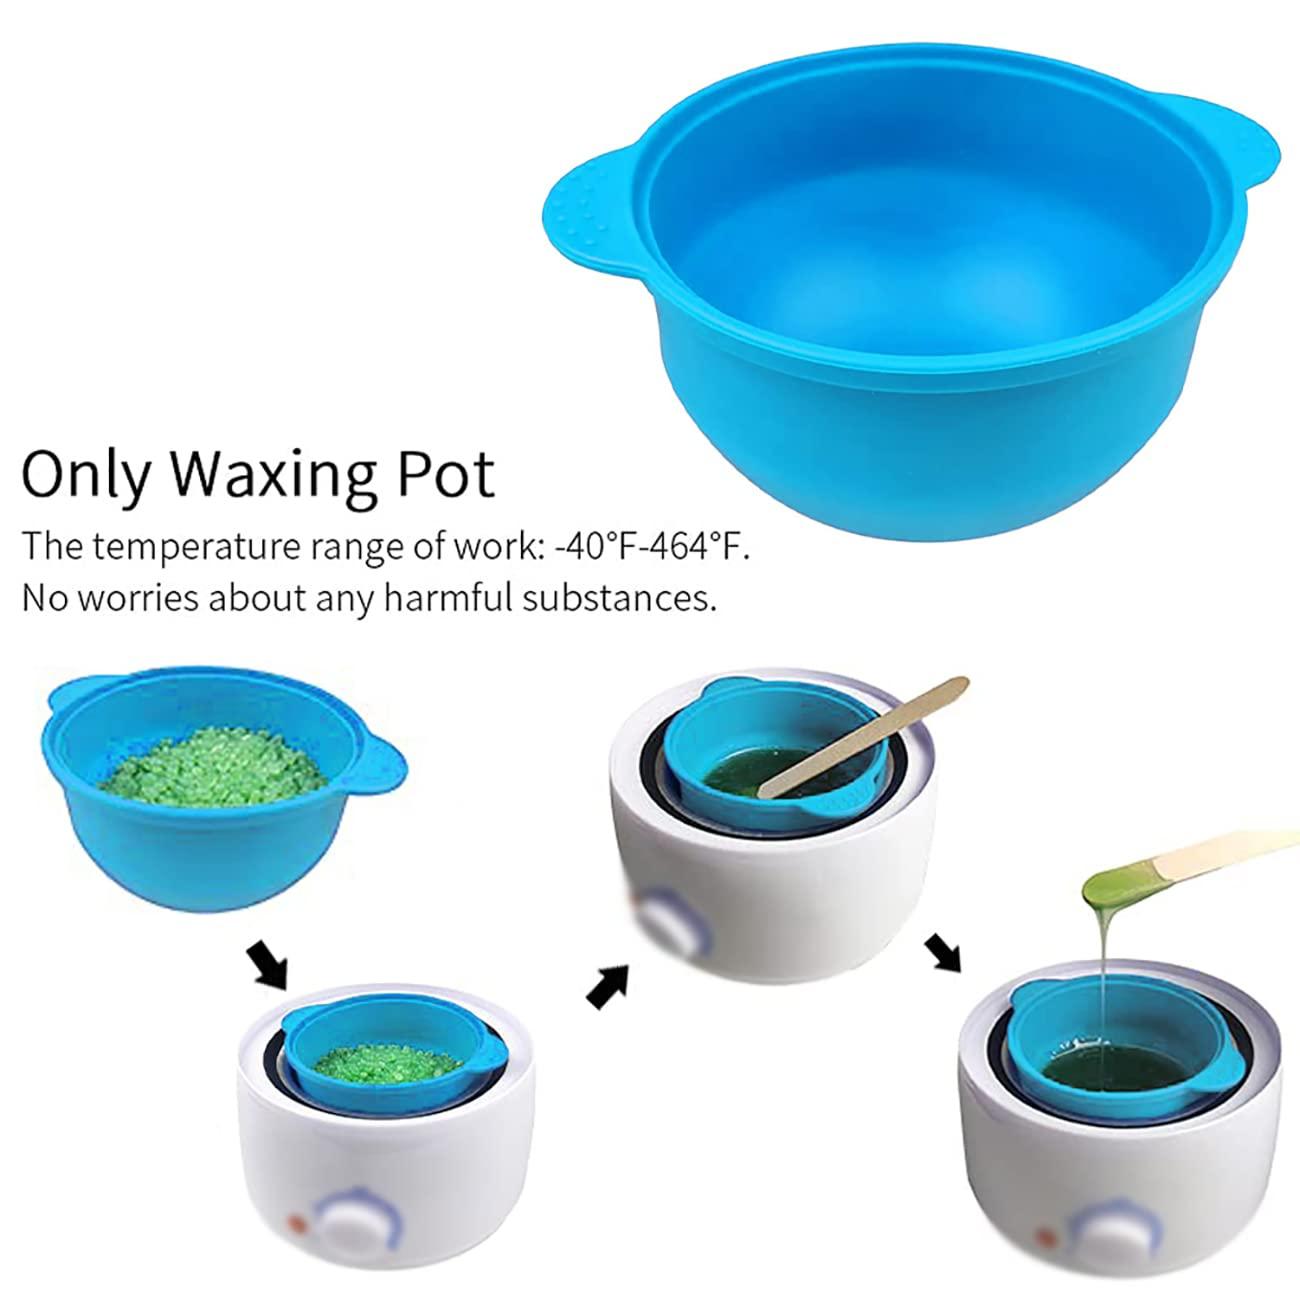 Our new silicone wax pot liners are SO easy to use! 😍 #waxpot